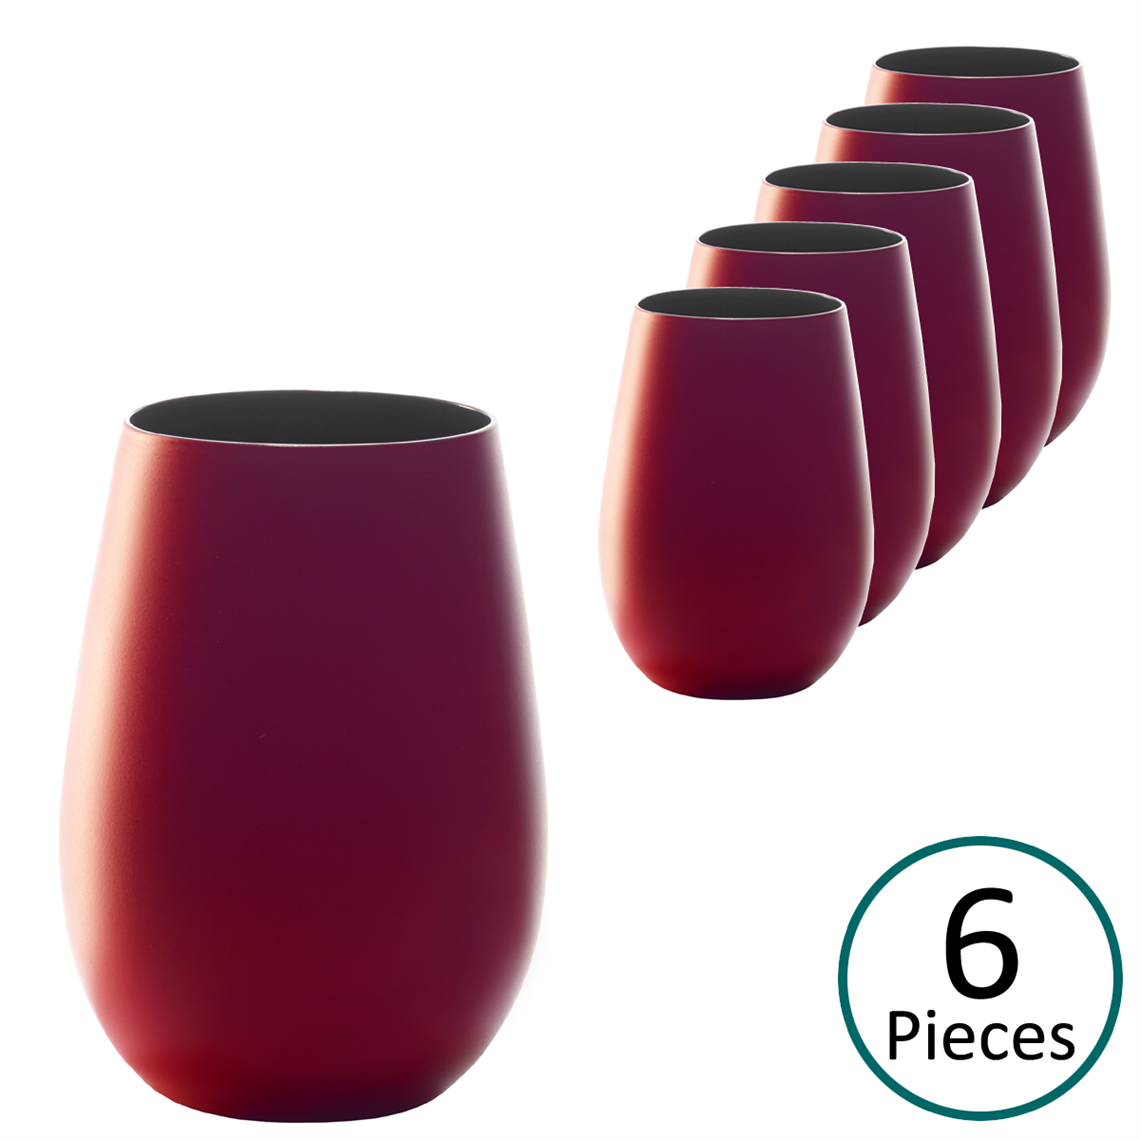 Stolzle Elements Red & Black Water/Mixer Tumbler Glass 465ml - Set of 6	